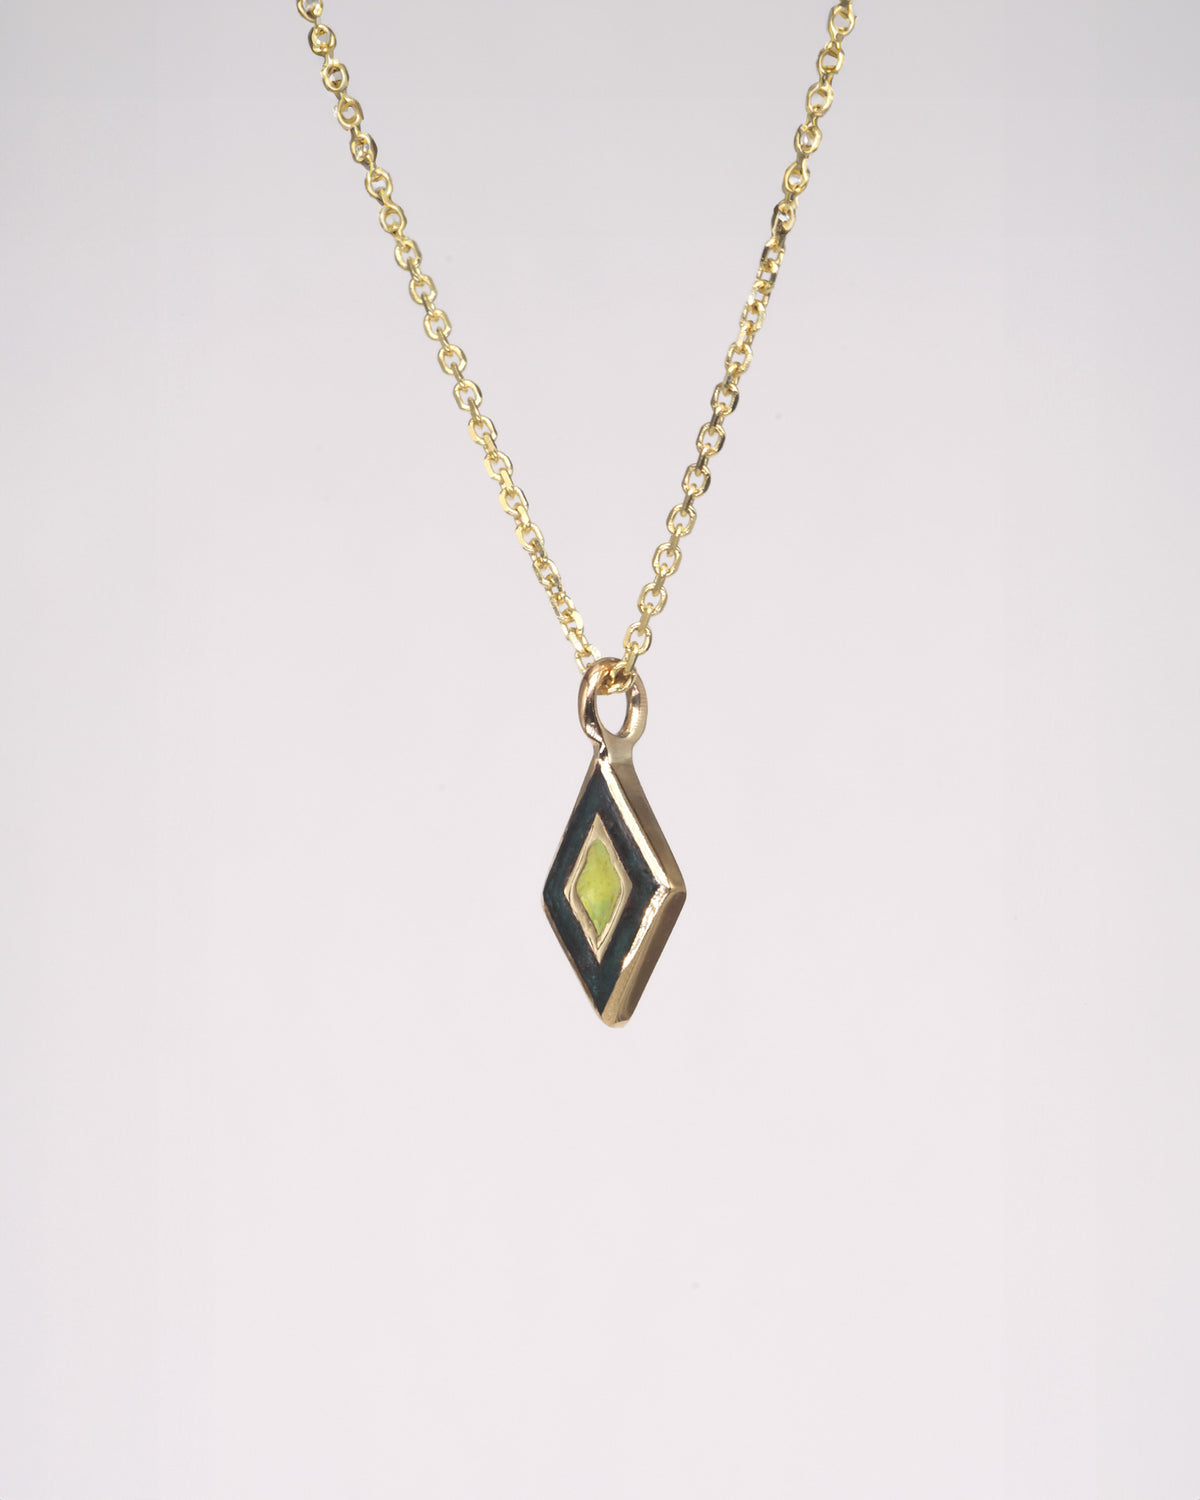 The Rhombus Necklace